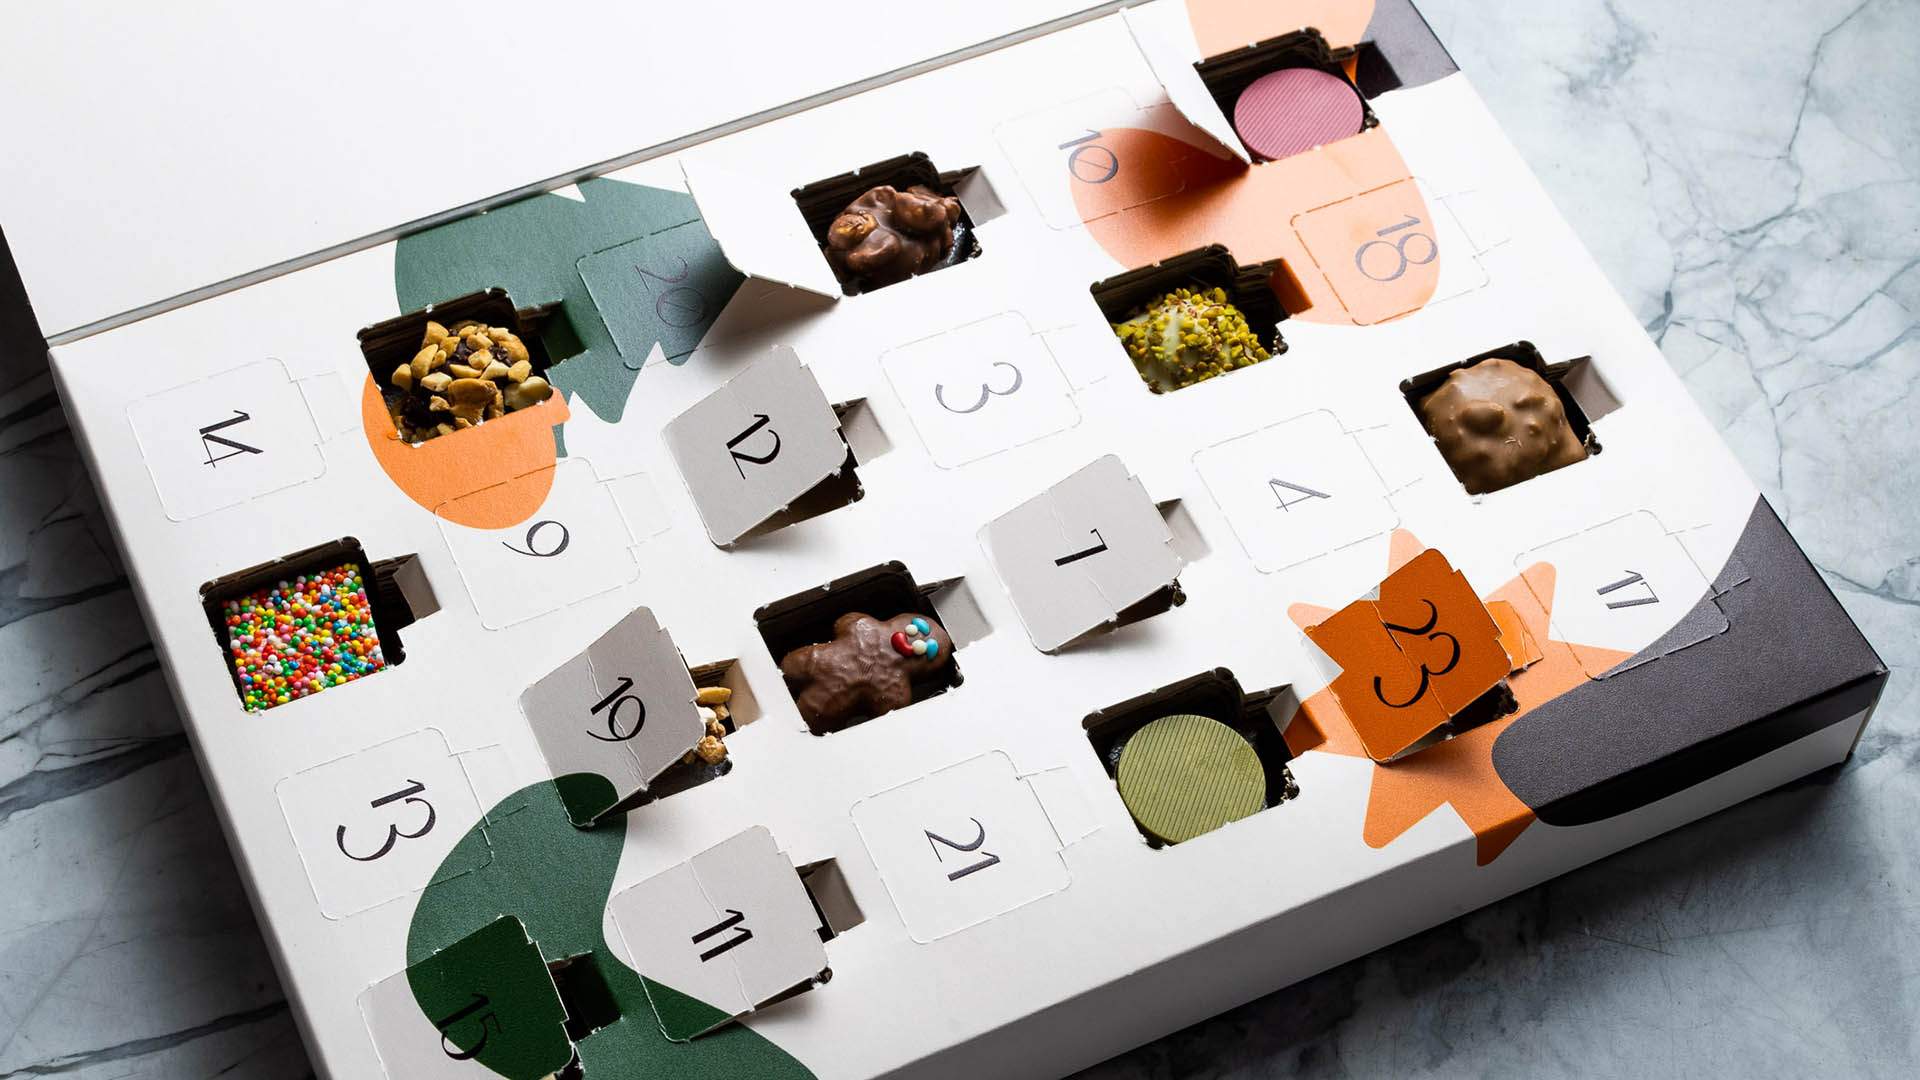 Gelato Messina Is Releasing Its First-Ever Advent Calendar to Make the Festive Season Extra Delicious